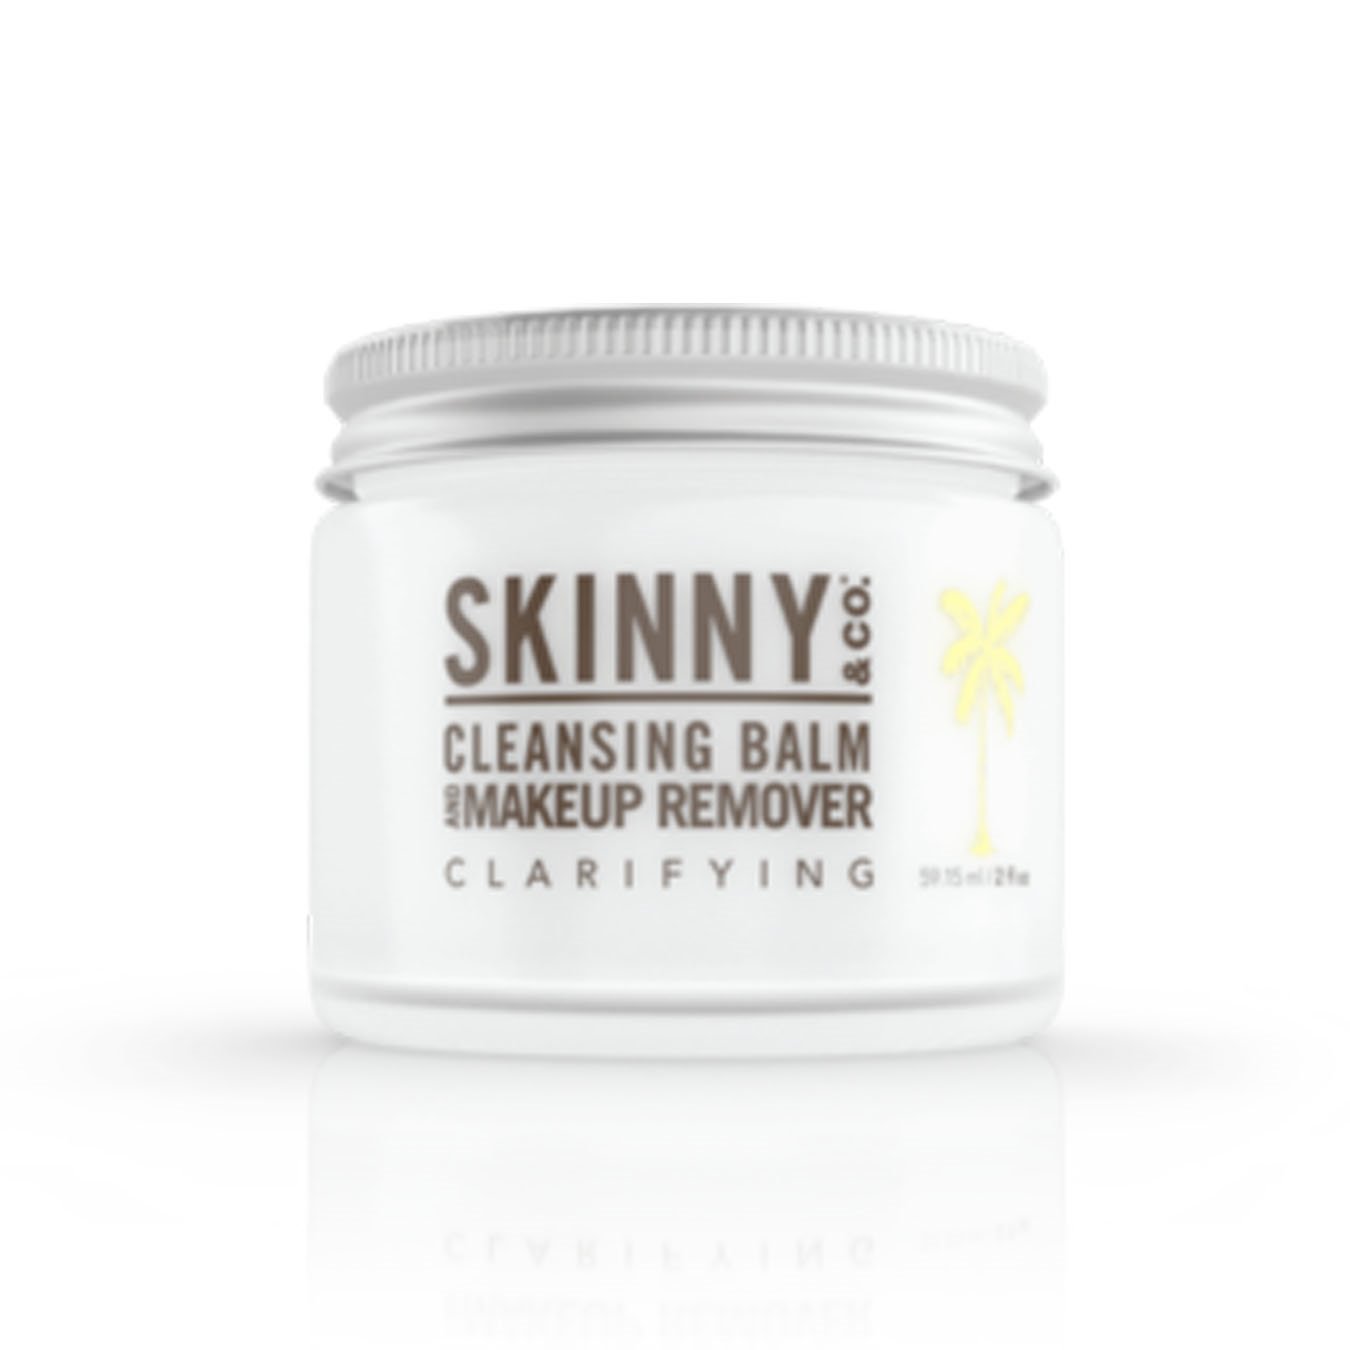 Skinny & Co. Clarifying Cleansing Balm/Makeup Remover (2 fl. Oz.)